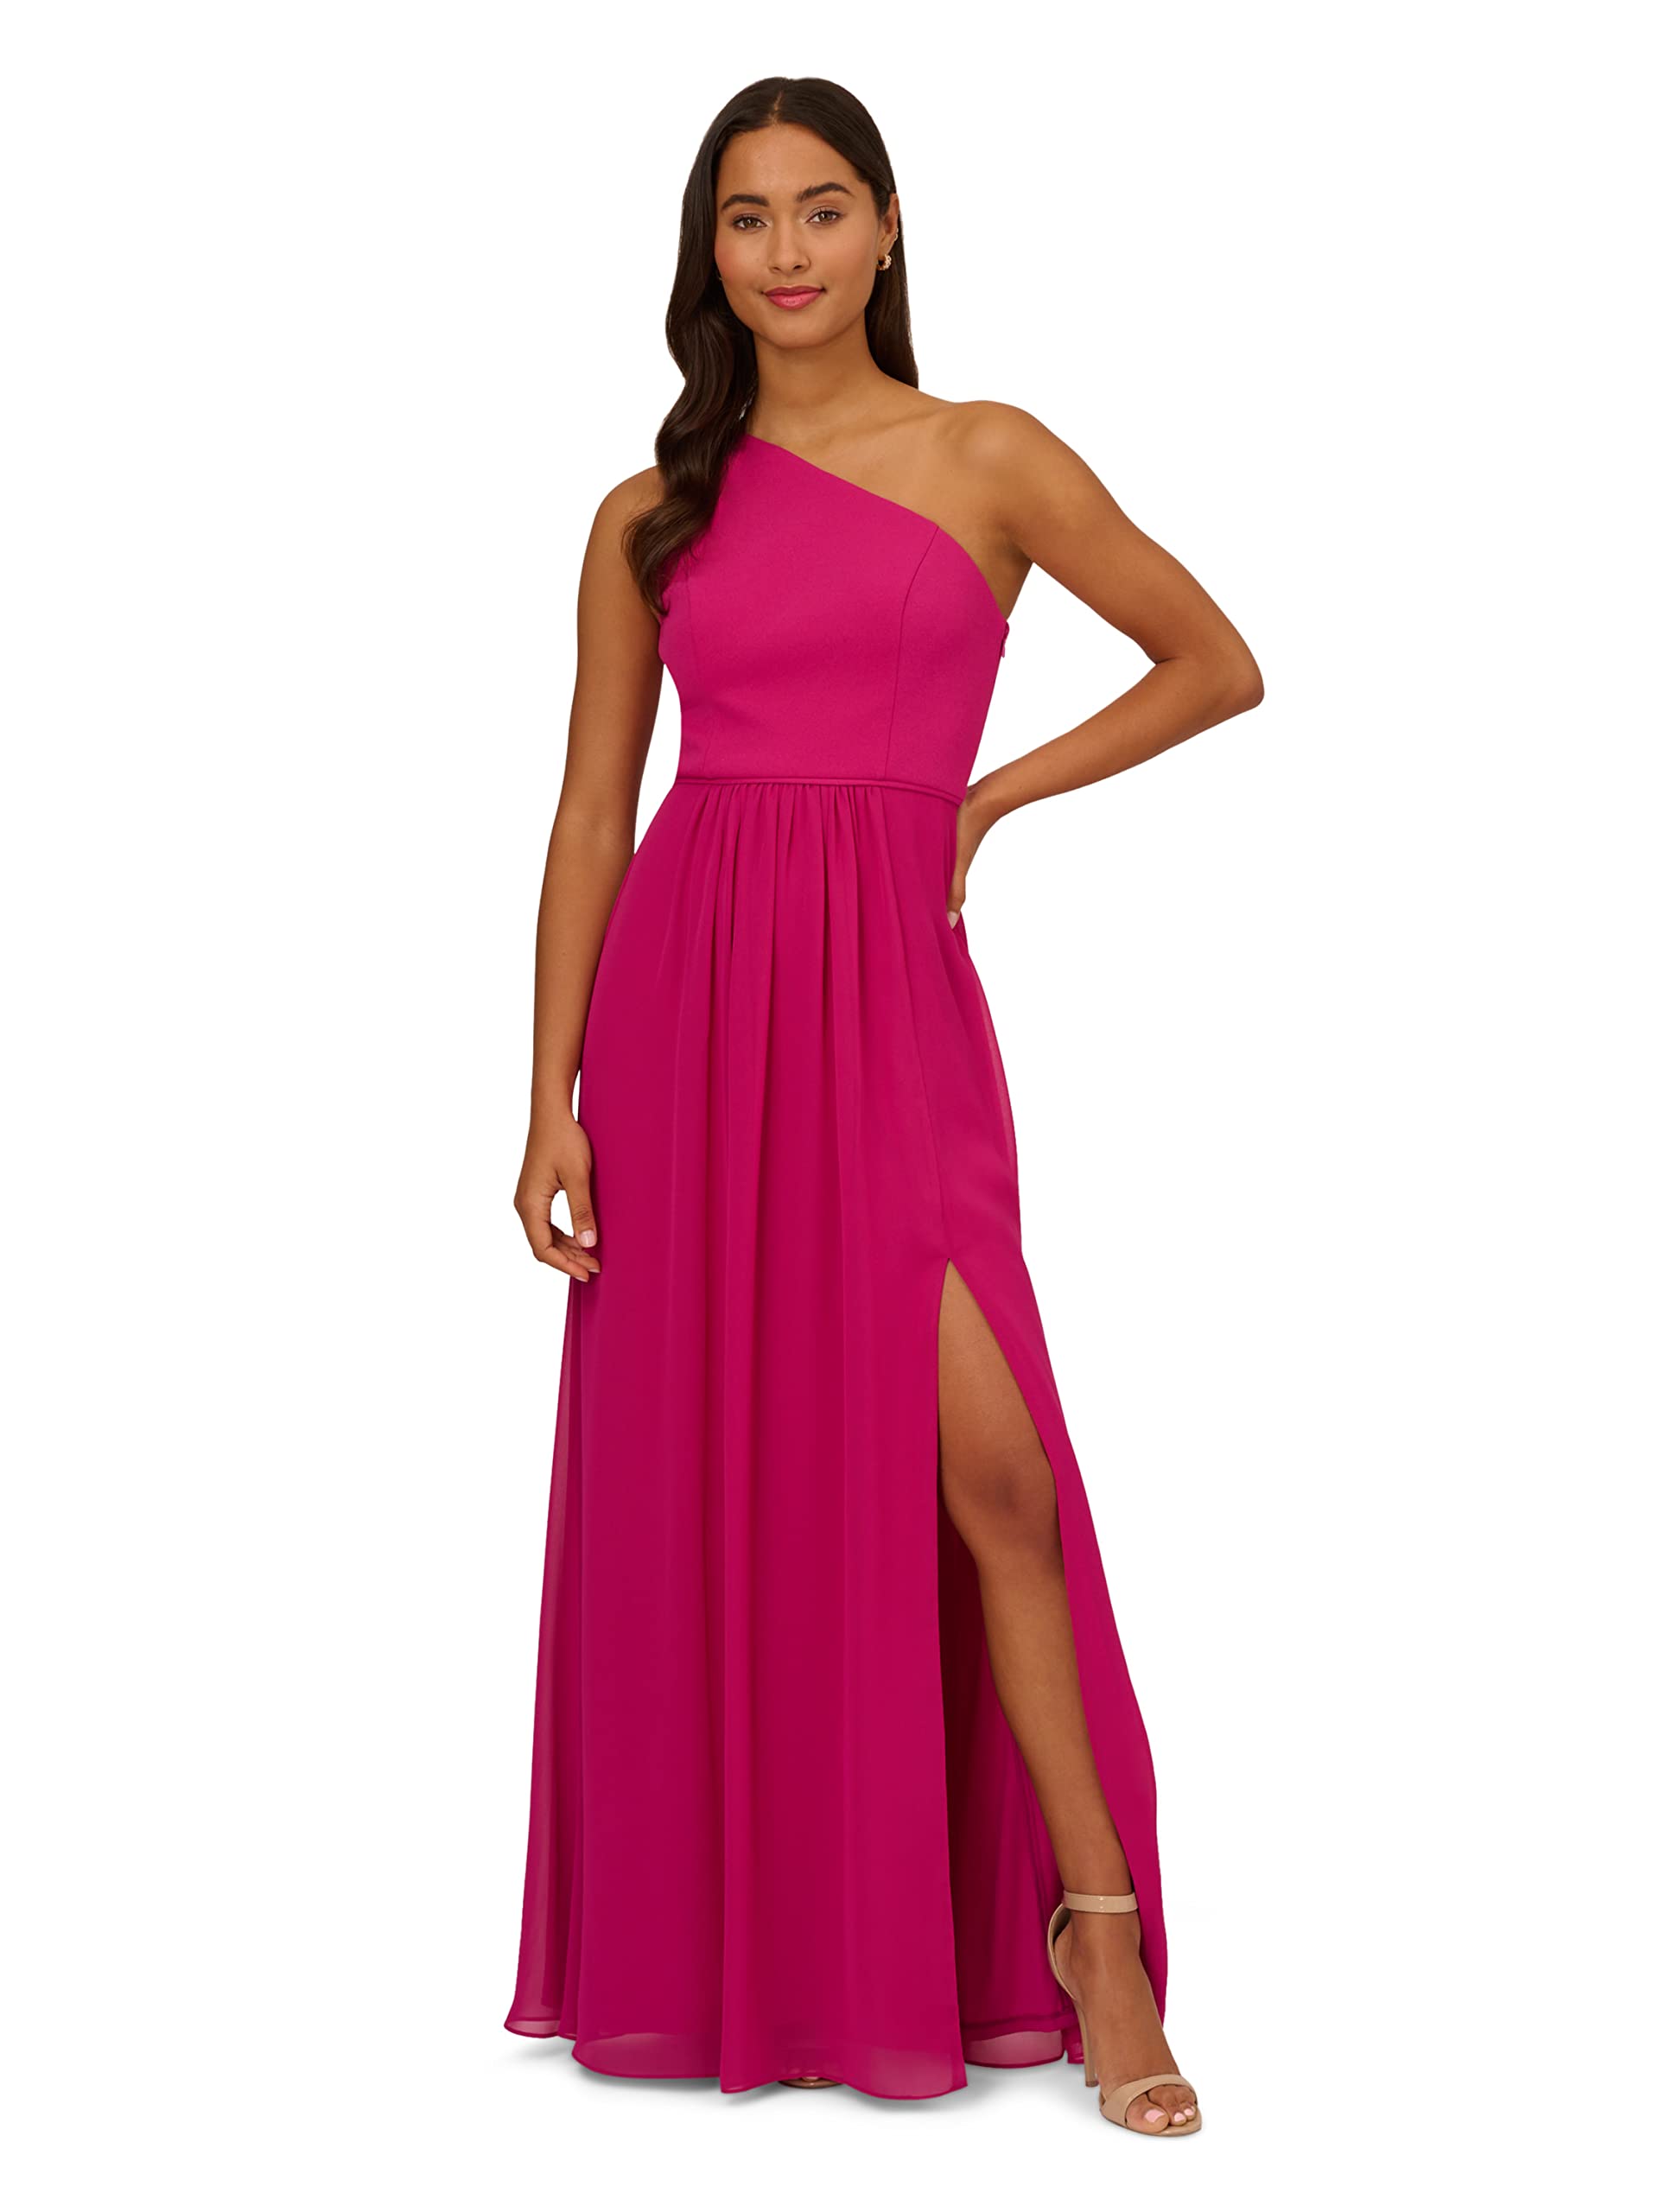 Adrianna Papell Women's One Shoulder Chiffon Gown